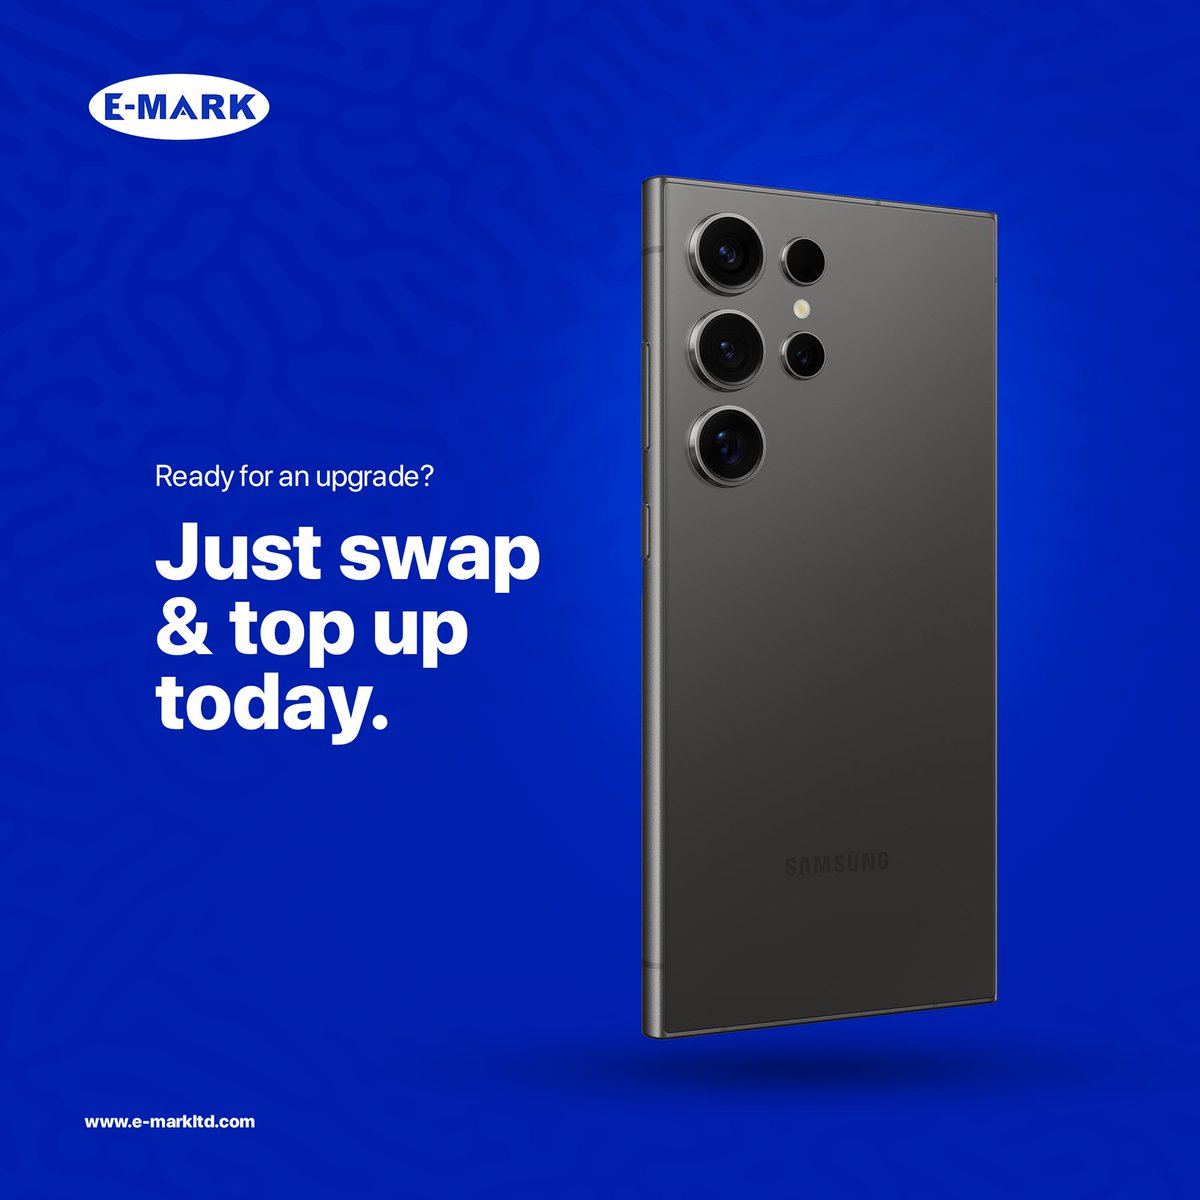 Ready for an upgrade? 🚀 Swap and top up your device today for a seamless transition to the latest tech! Stay ahead, stay connected. #TechUpgrade #DeviceSwap #Recycle